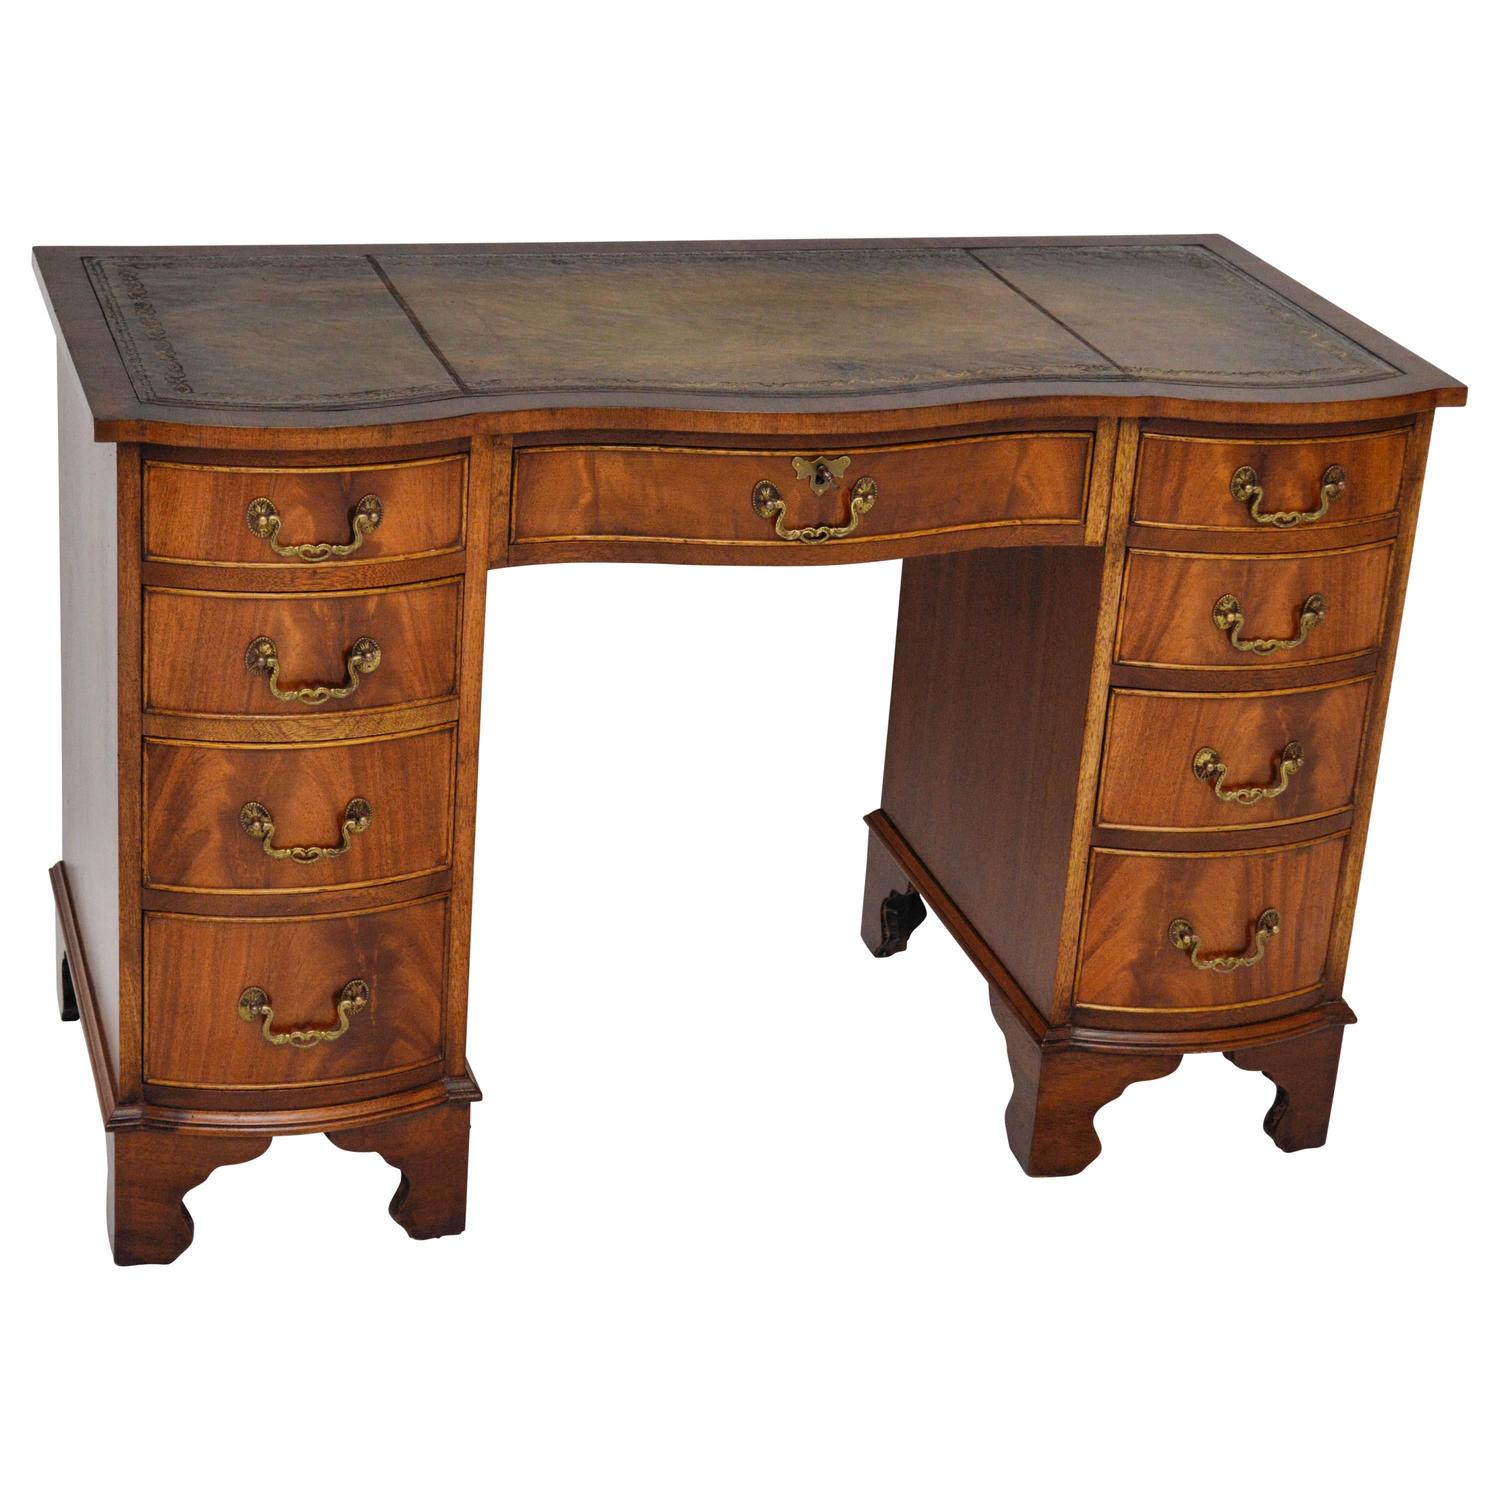 Antique Georgian Style Flame Mahogany Leather Top Desk At 1stdibs